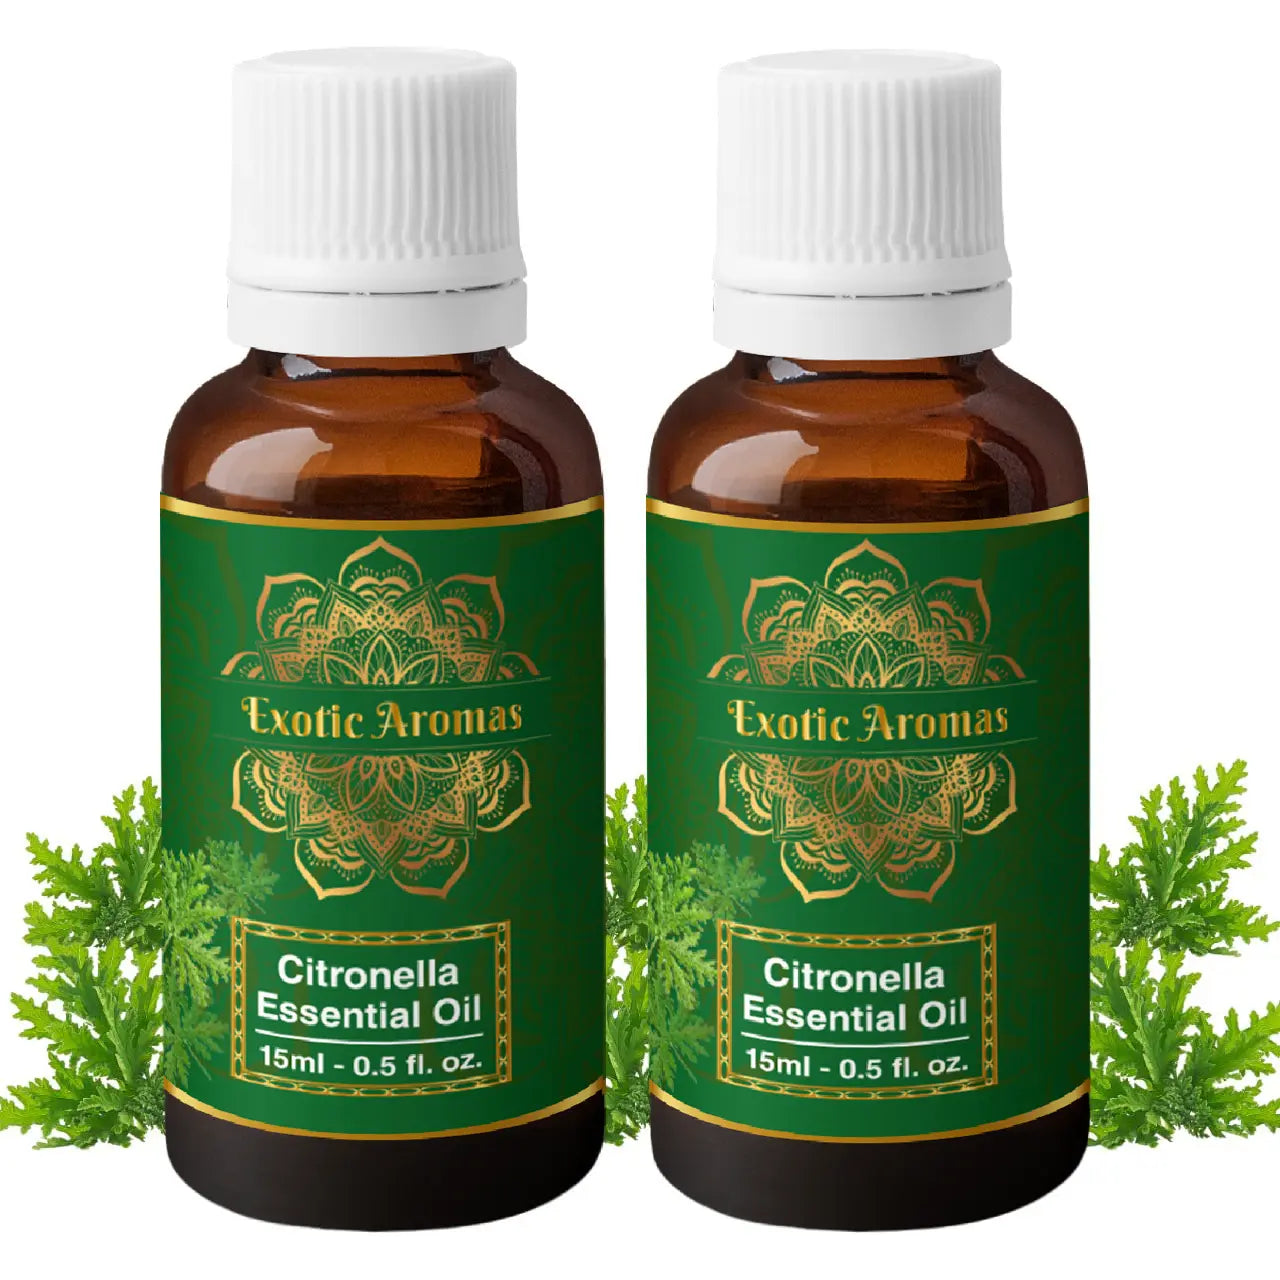 Citronella Essential Oil for Aroma Therapy, Hair & Skin (15Ml + 15Ml) Pack of 2